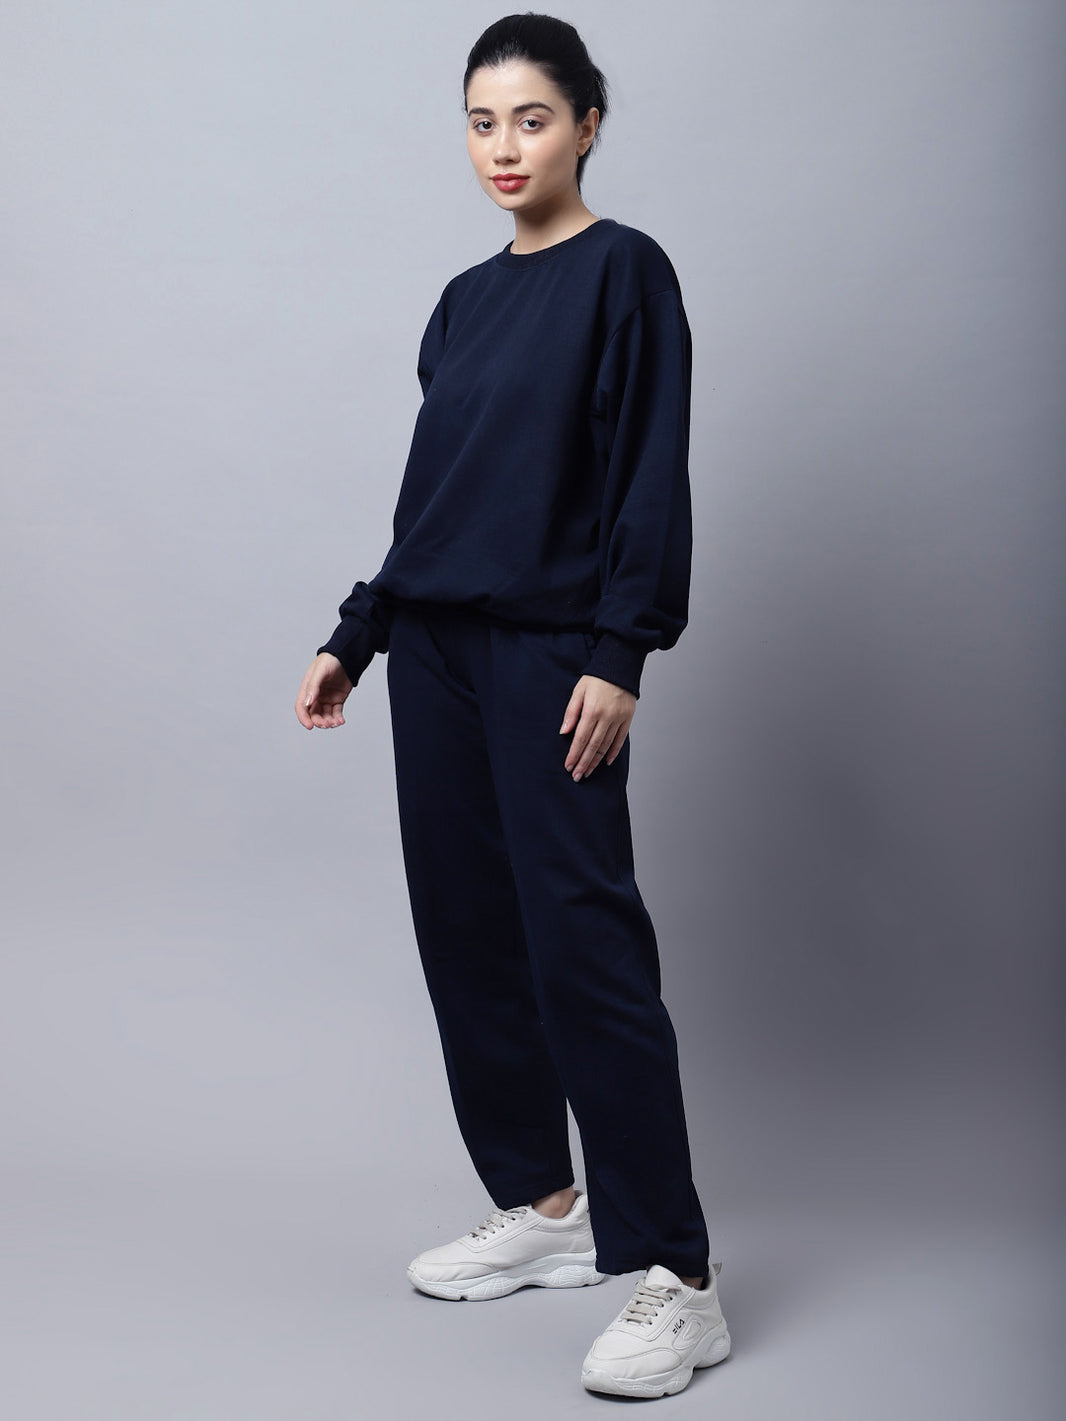 Luxury Designer Juicy Tracksuit Skims Set With Scrubs For Women Two Piece  Uniform Suit With Legging Jumpsuit And Pants Outfit By Brand Leek From  Makeitchange, $51.56